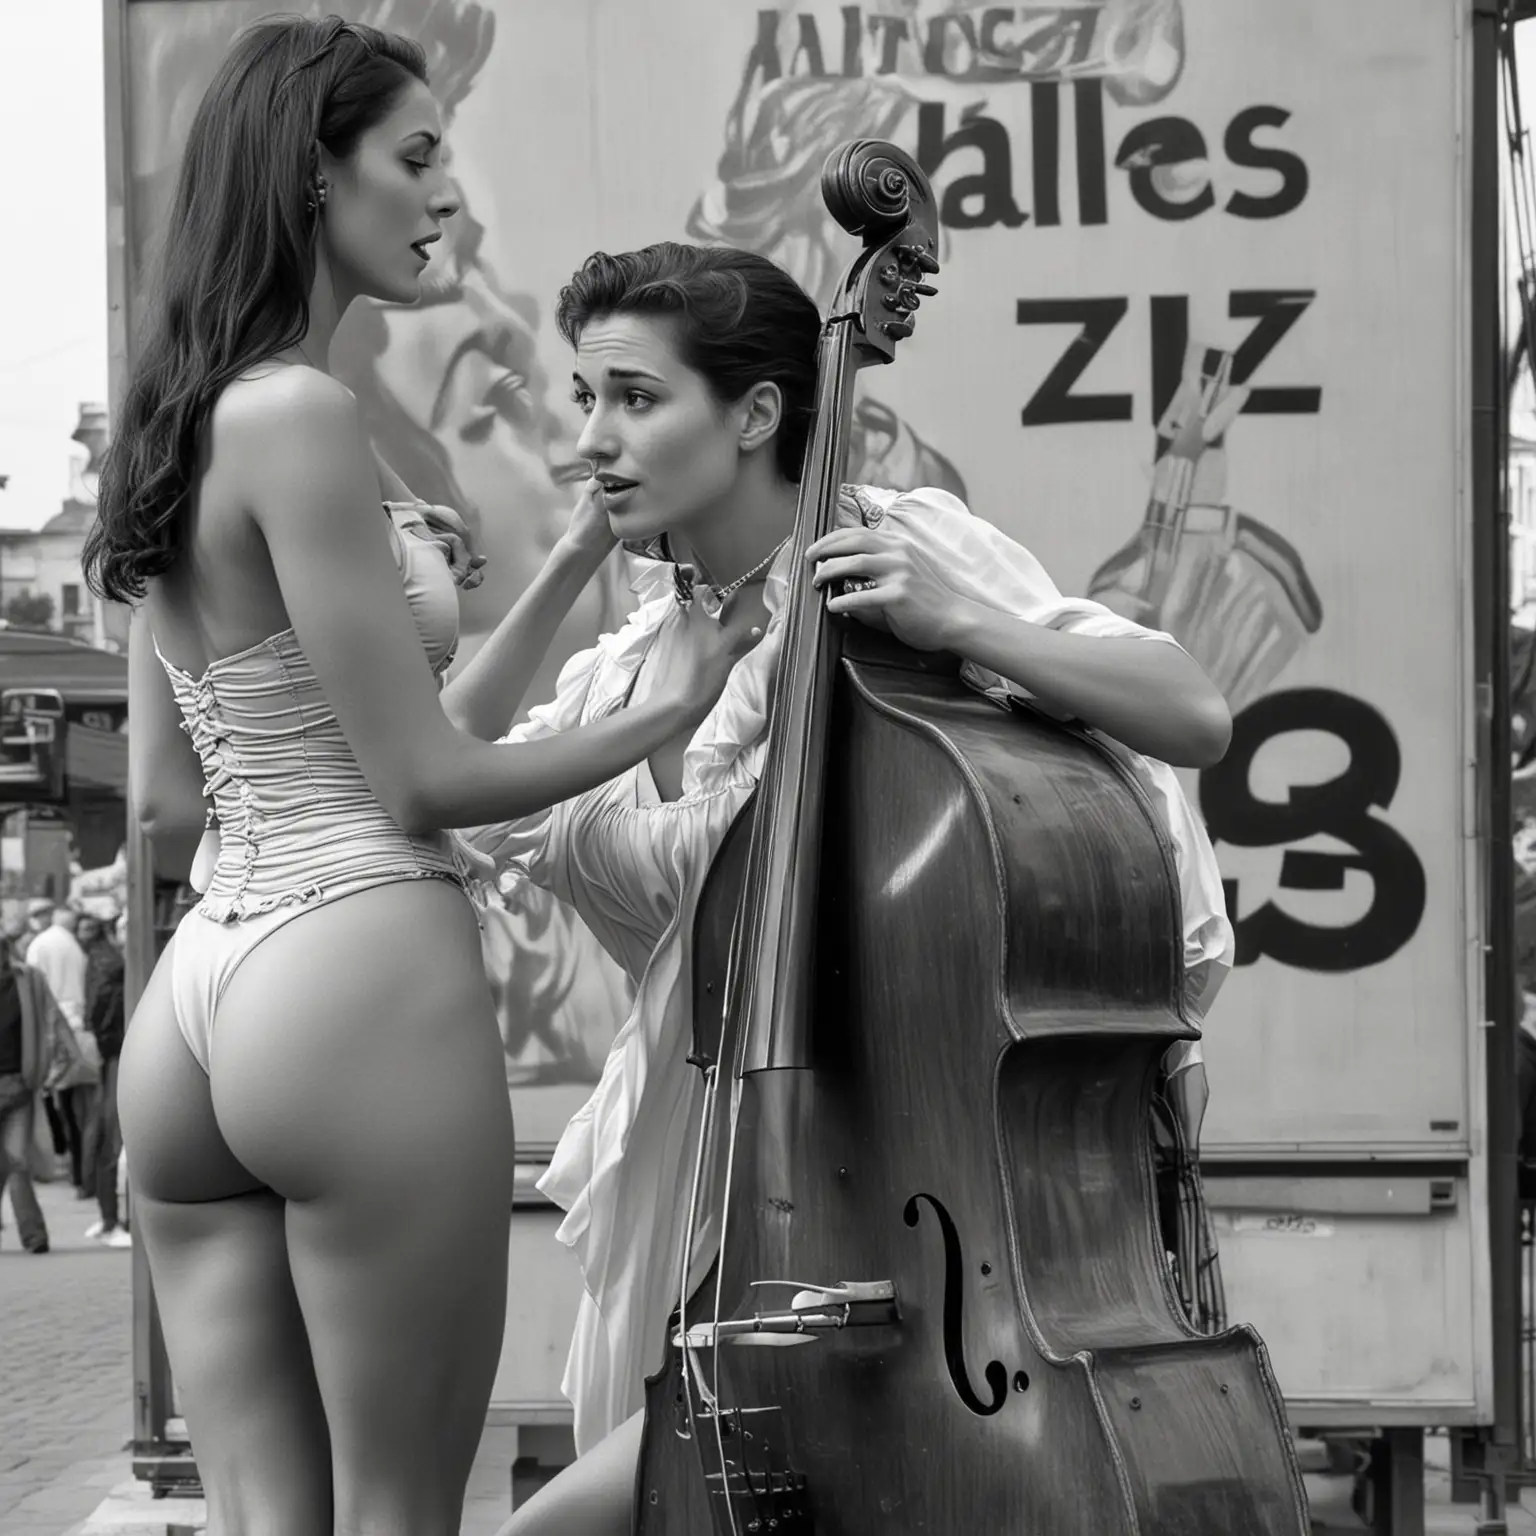 sexy Italian woman  with double bass; in the background a billboard with "ALTES ZEUG" next to a man playing the trumpet
